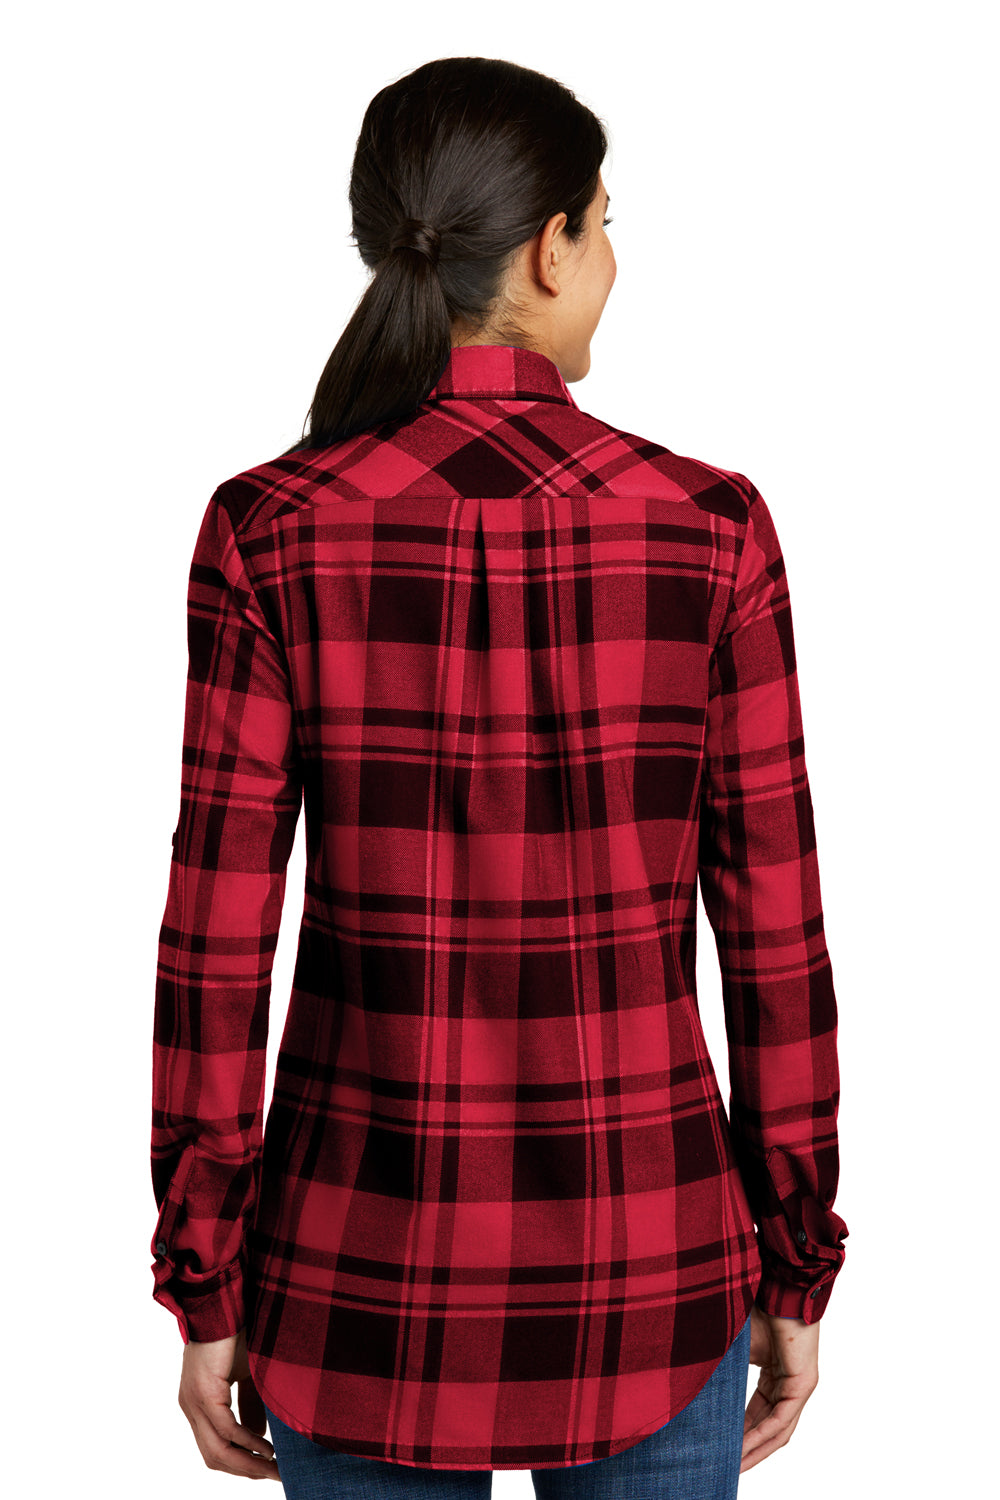 Port Authority LW668 Womens Flannel Long Sleeve Button Down Shirt Red/Black Back